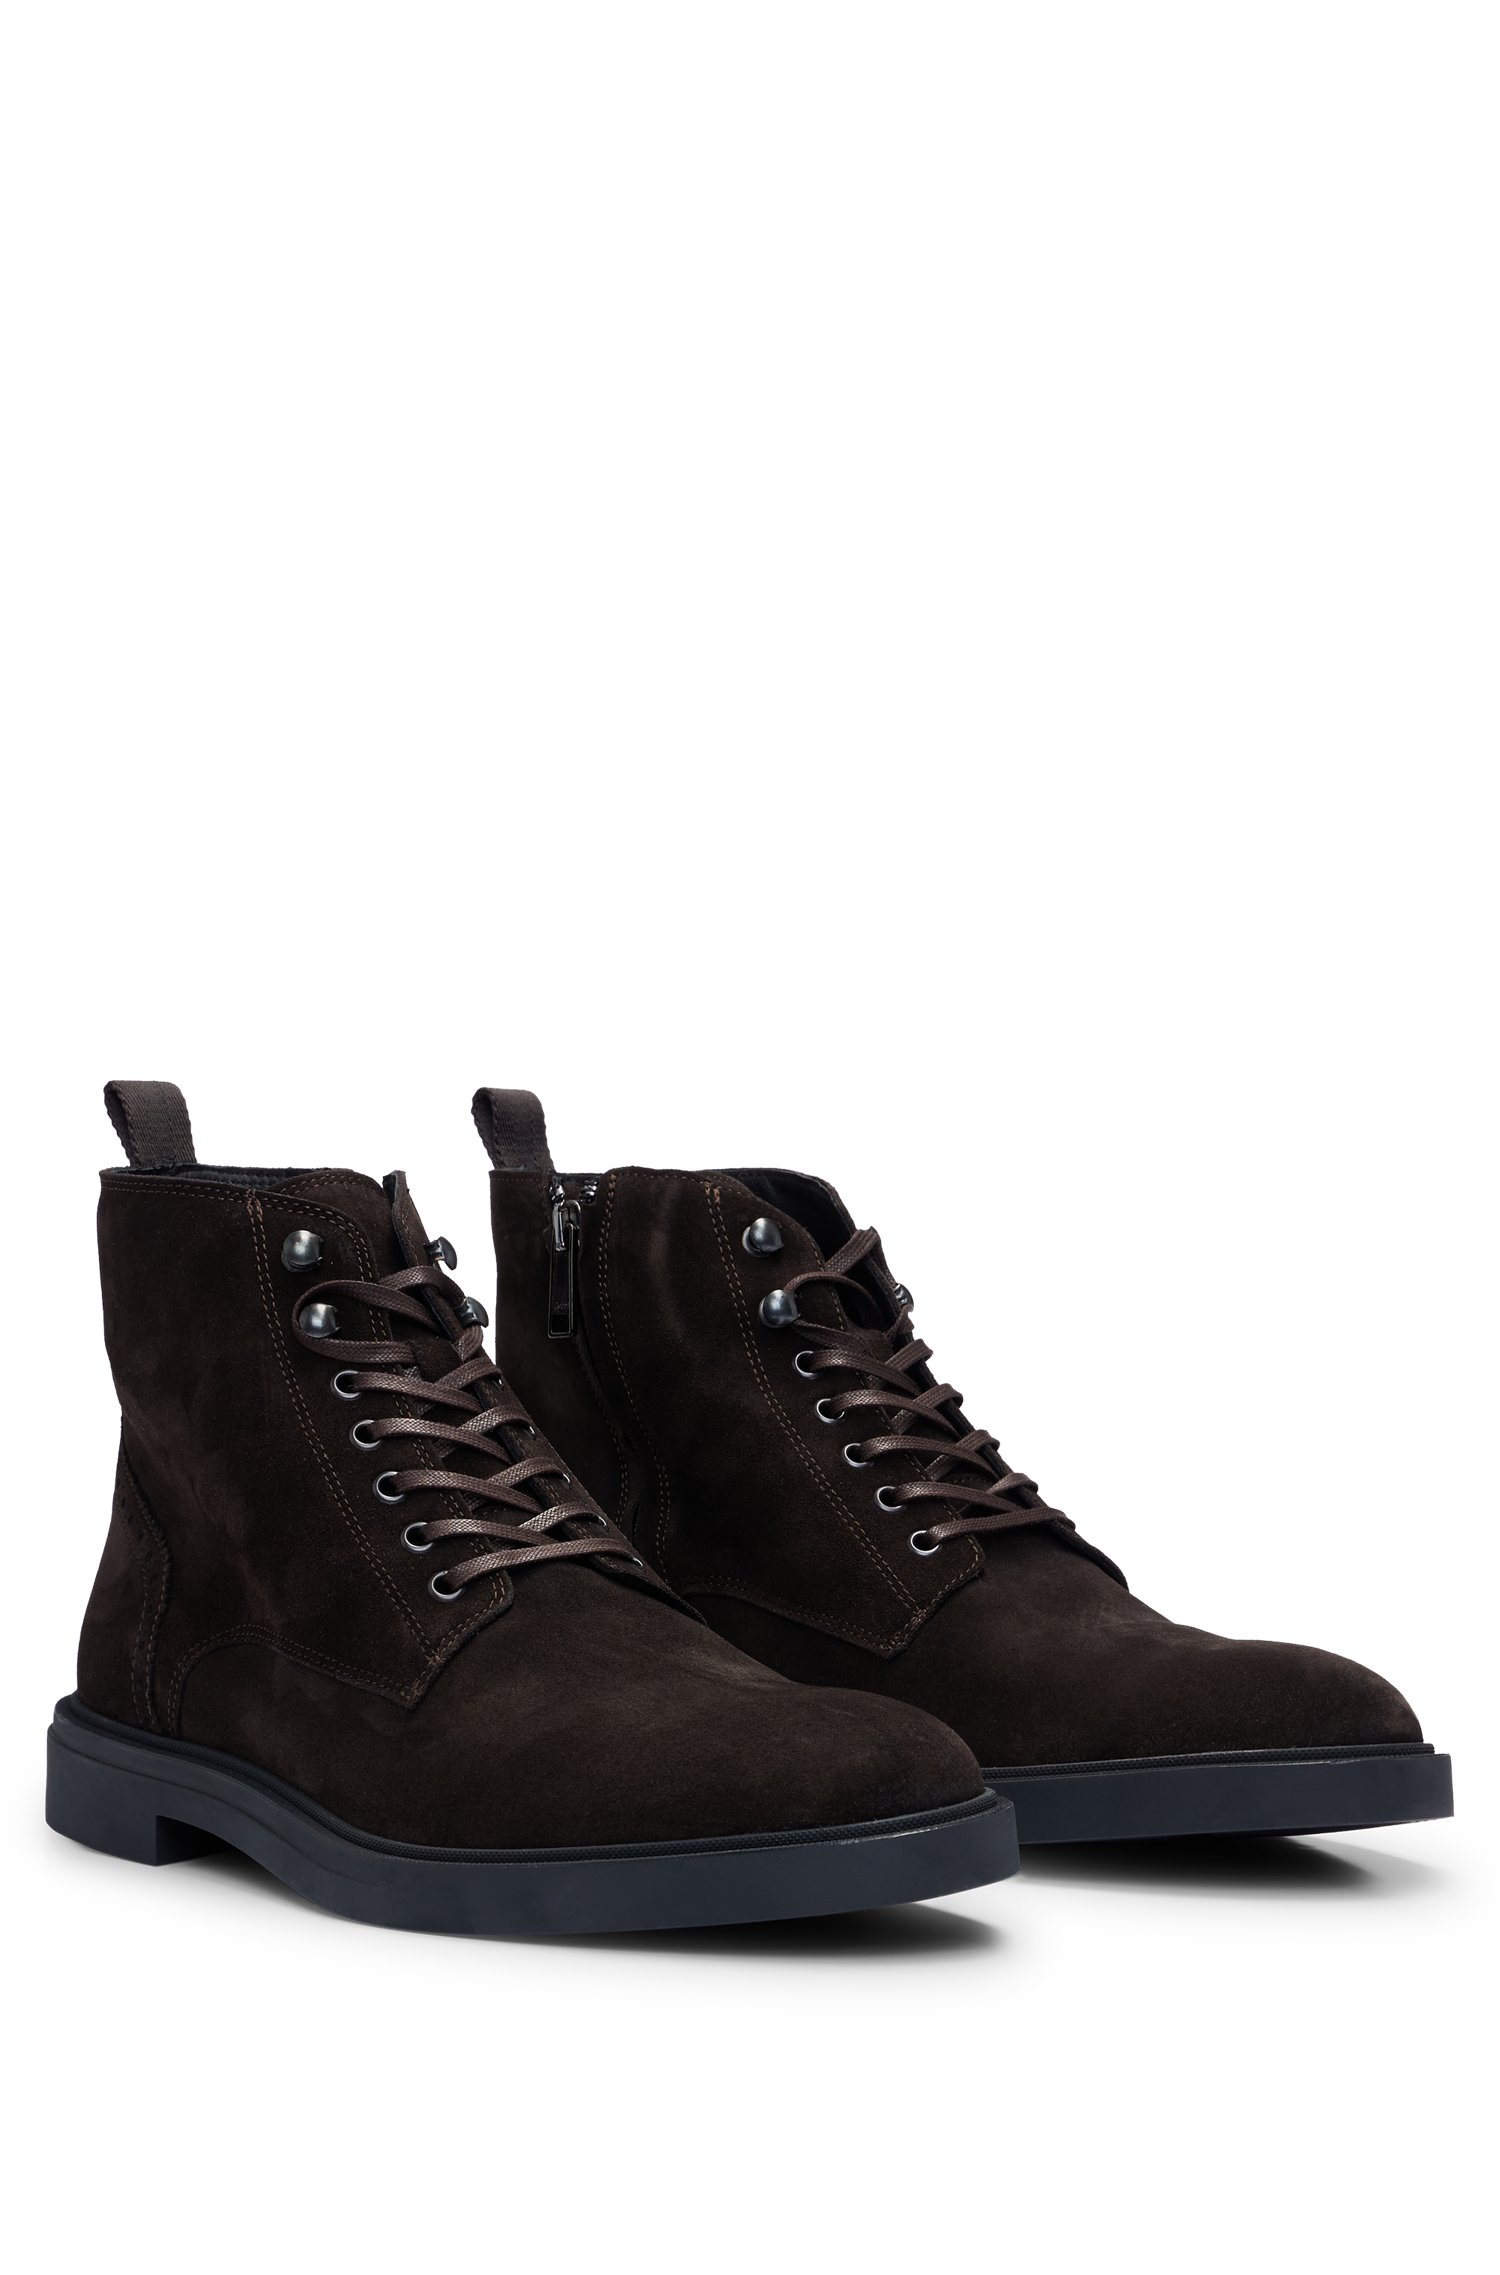 Suede half boots with side zip and signature accents